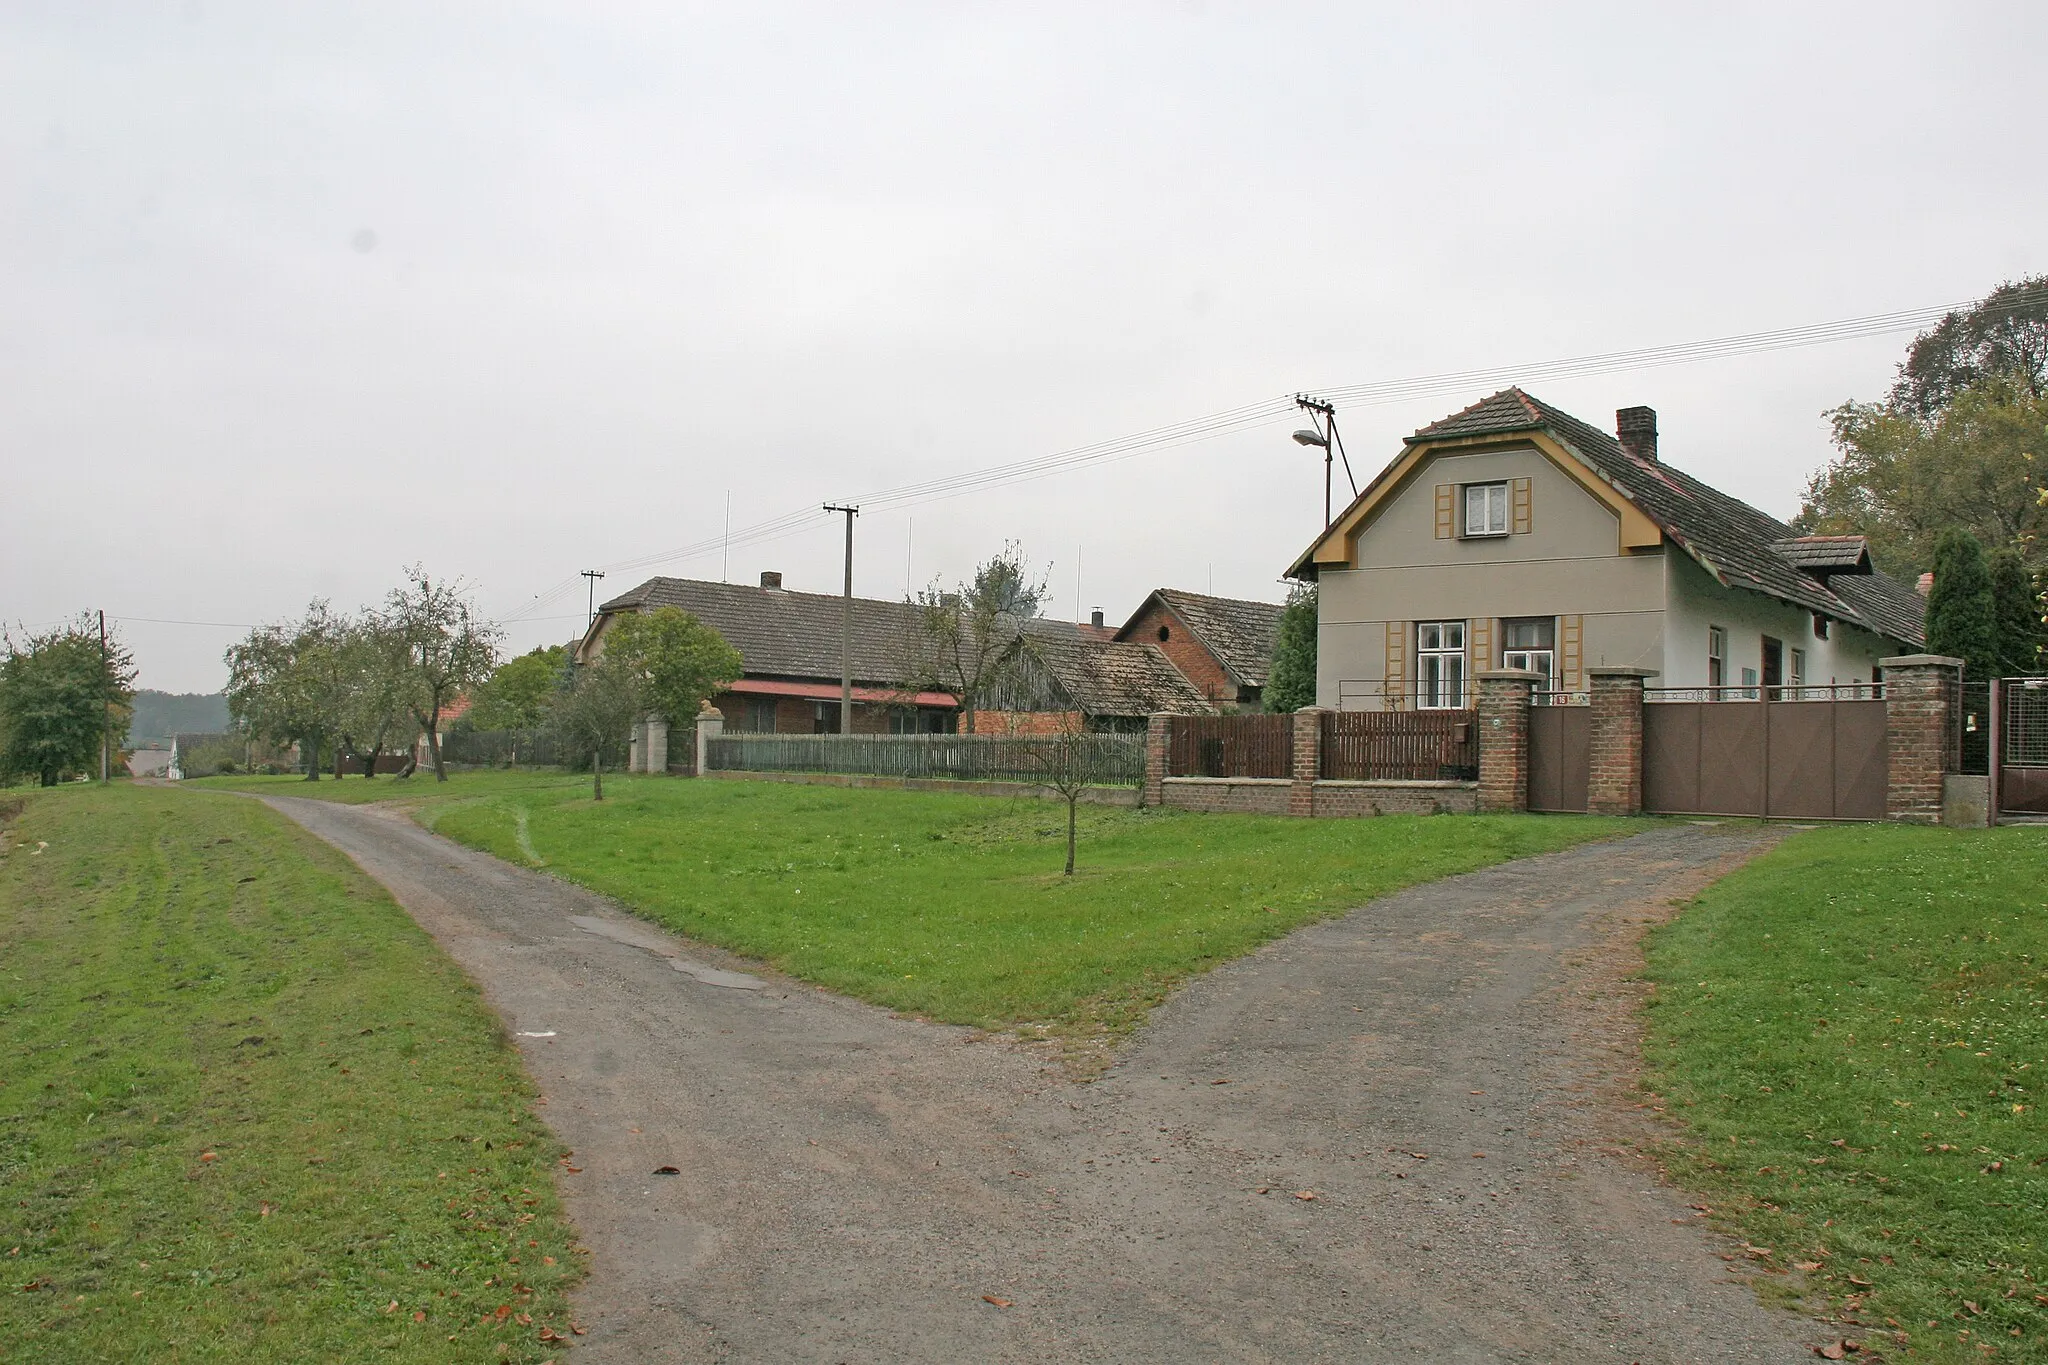 Photo showing: Rasochy čp. 16
Camera location 50° 05′ 24.72″ N, 15° 24′ 27.54″ E View this and other nearby images on: OpenStreetMap 50.090199;   15.407649

This file was created as a part of the photographic program of Wikimedia Czech Republic. Project: Foto českých obcí The program supports Wikimedia Commons photographers in the Czech Republic.